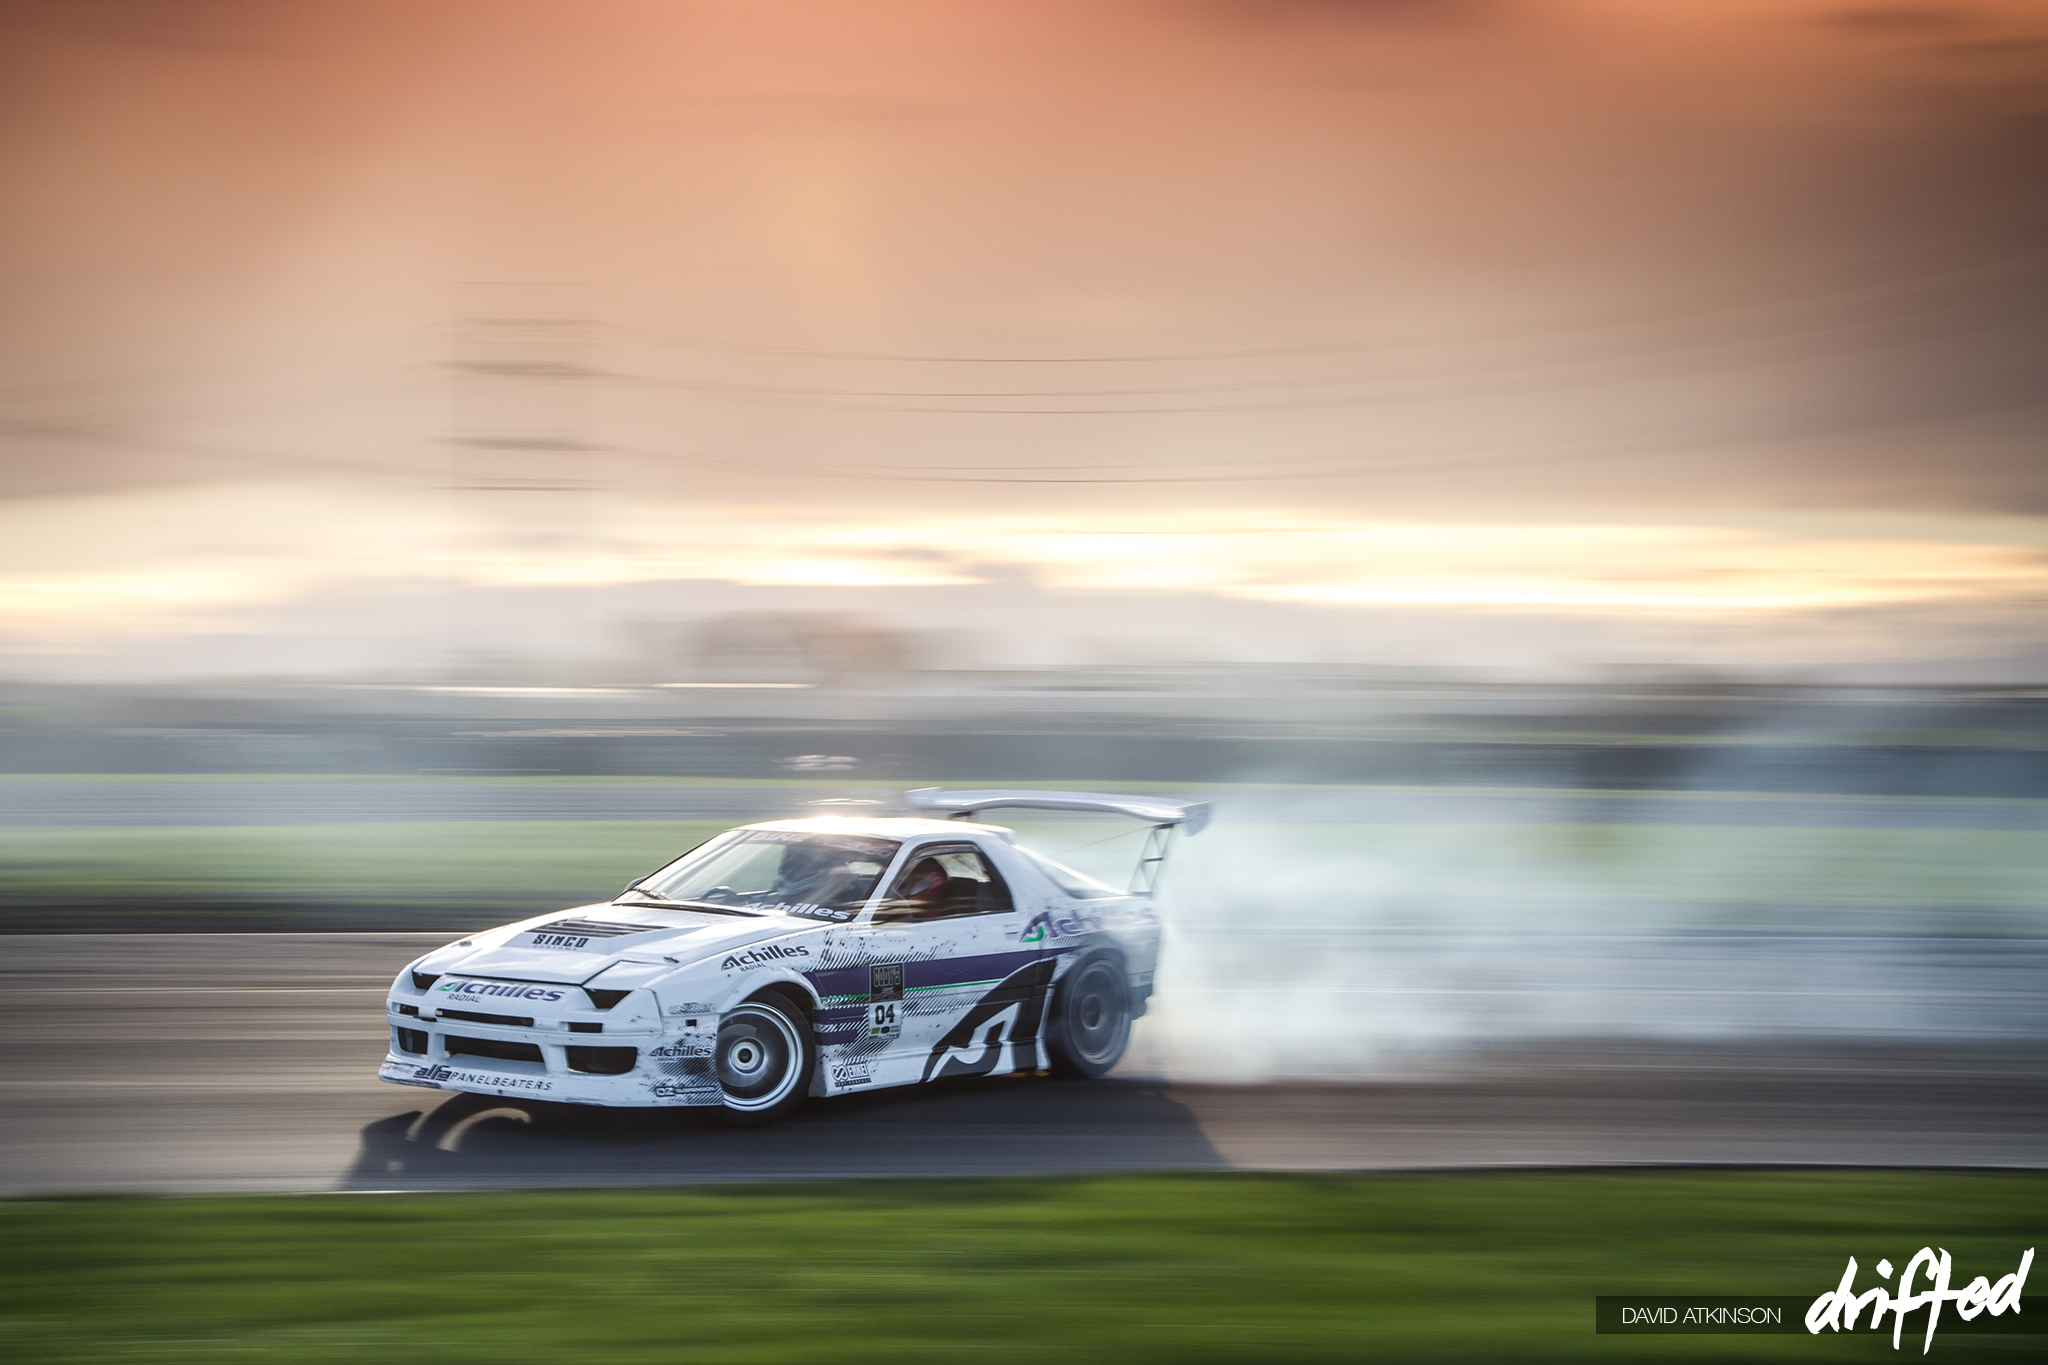 Andrew Redward RX7